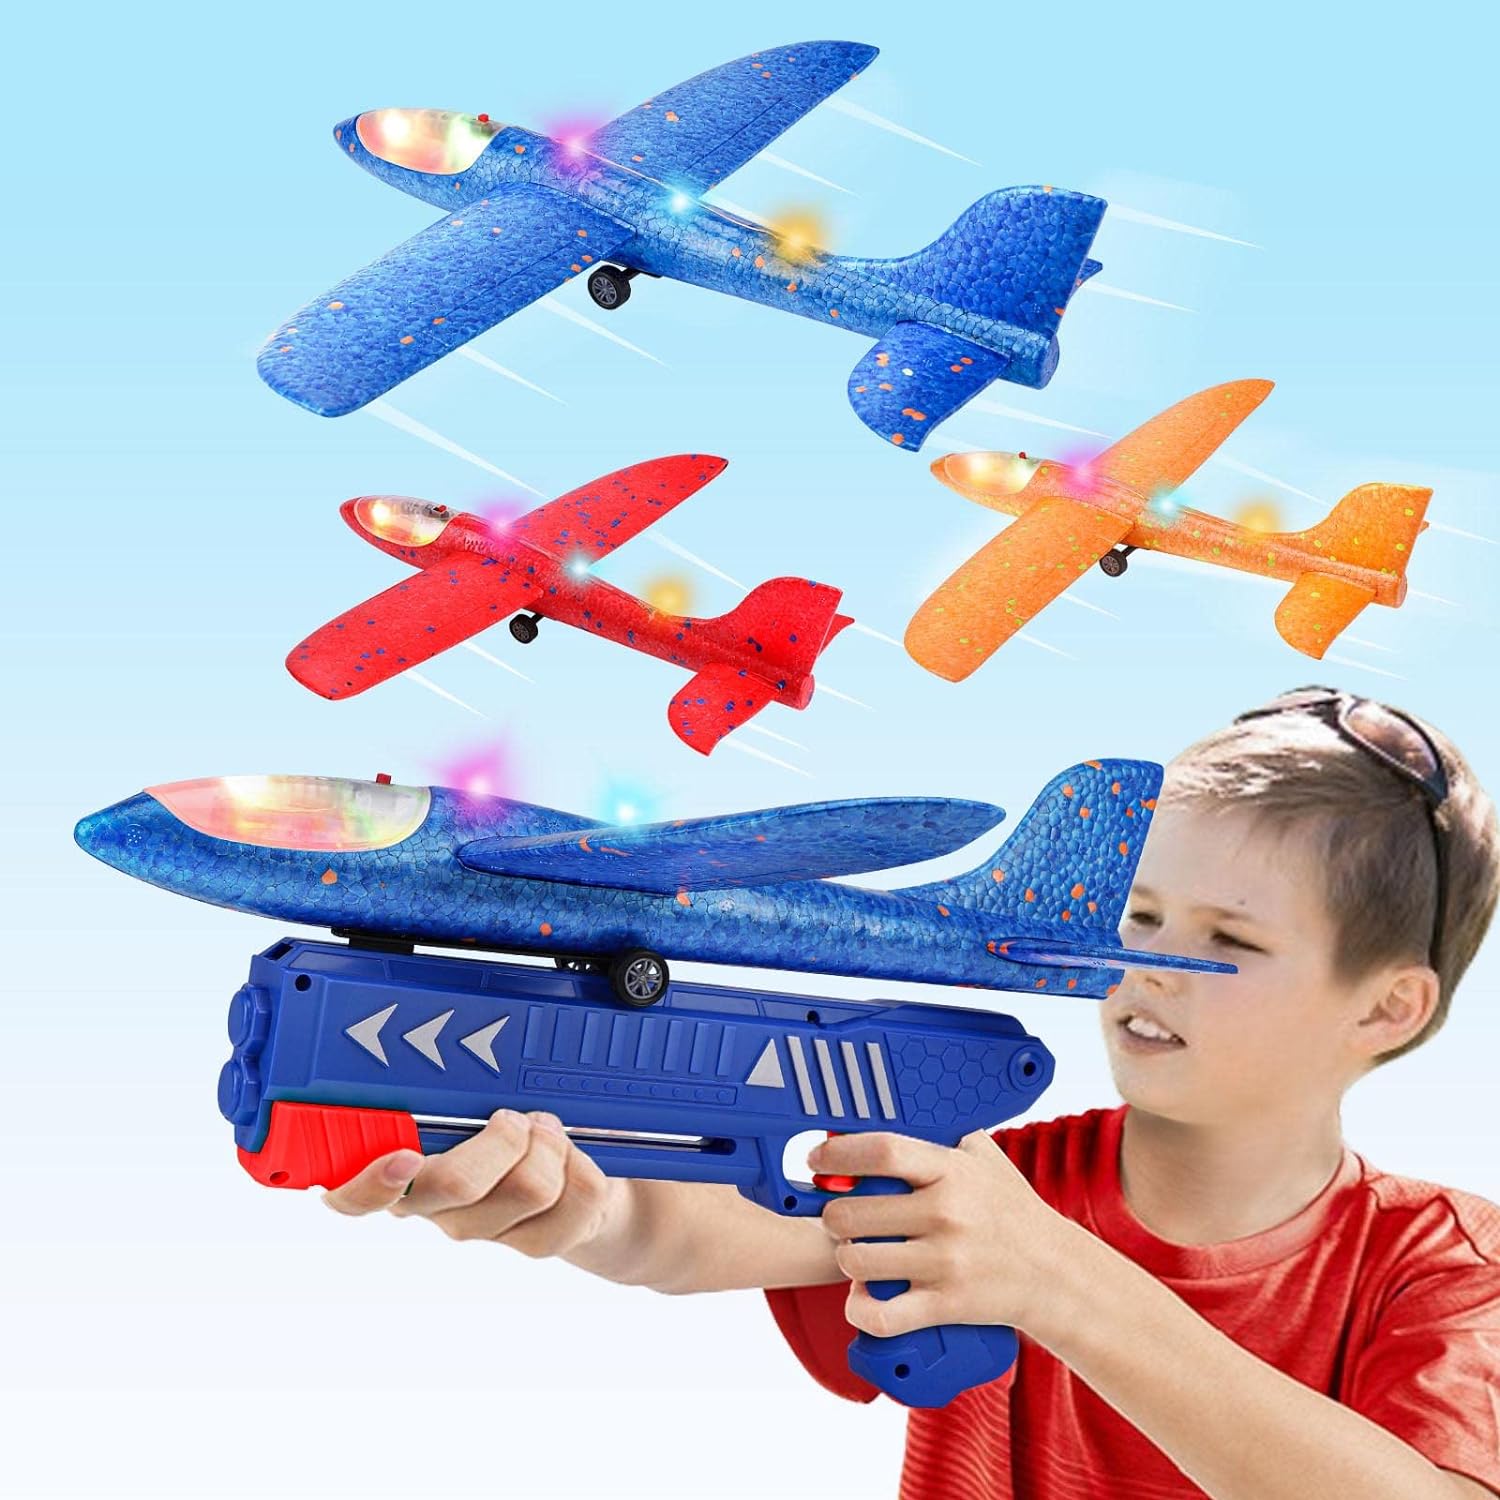 Limited Time Offer! 3 Pack Airplane Launcher Toy - 46% Off